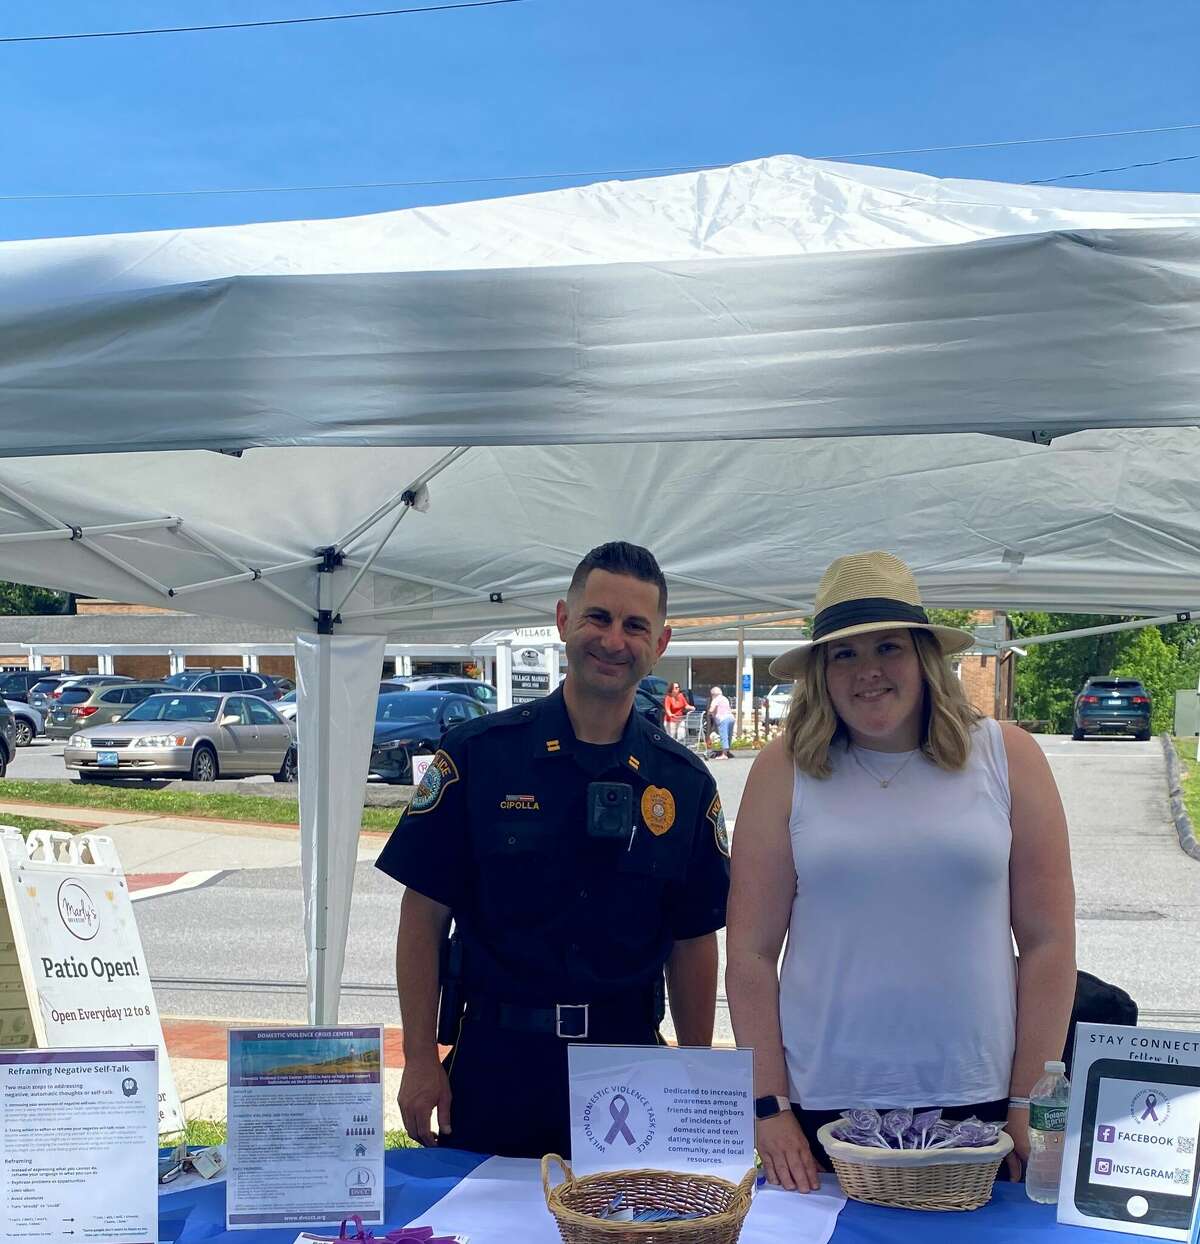 Wilton Police Department Captain Robert Cipolla, left, and Associate Director of the Domestic Violence Crisis Center Ann Rodwell-Lawton, right, promote awareness of their partnership to combat domestic violence within the community at the Wilton Farmer's Market.